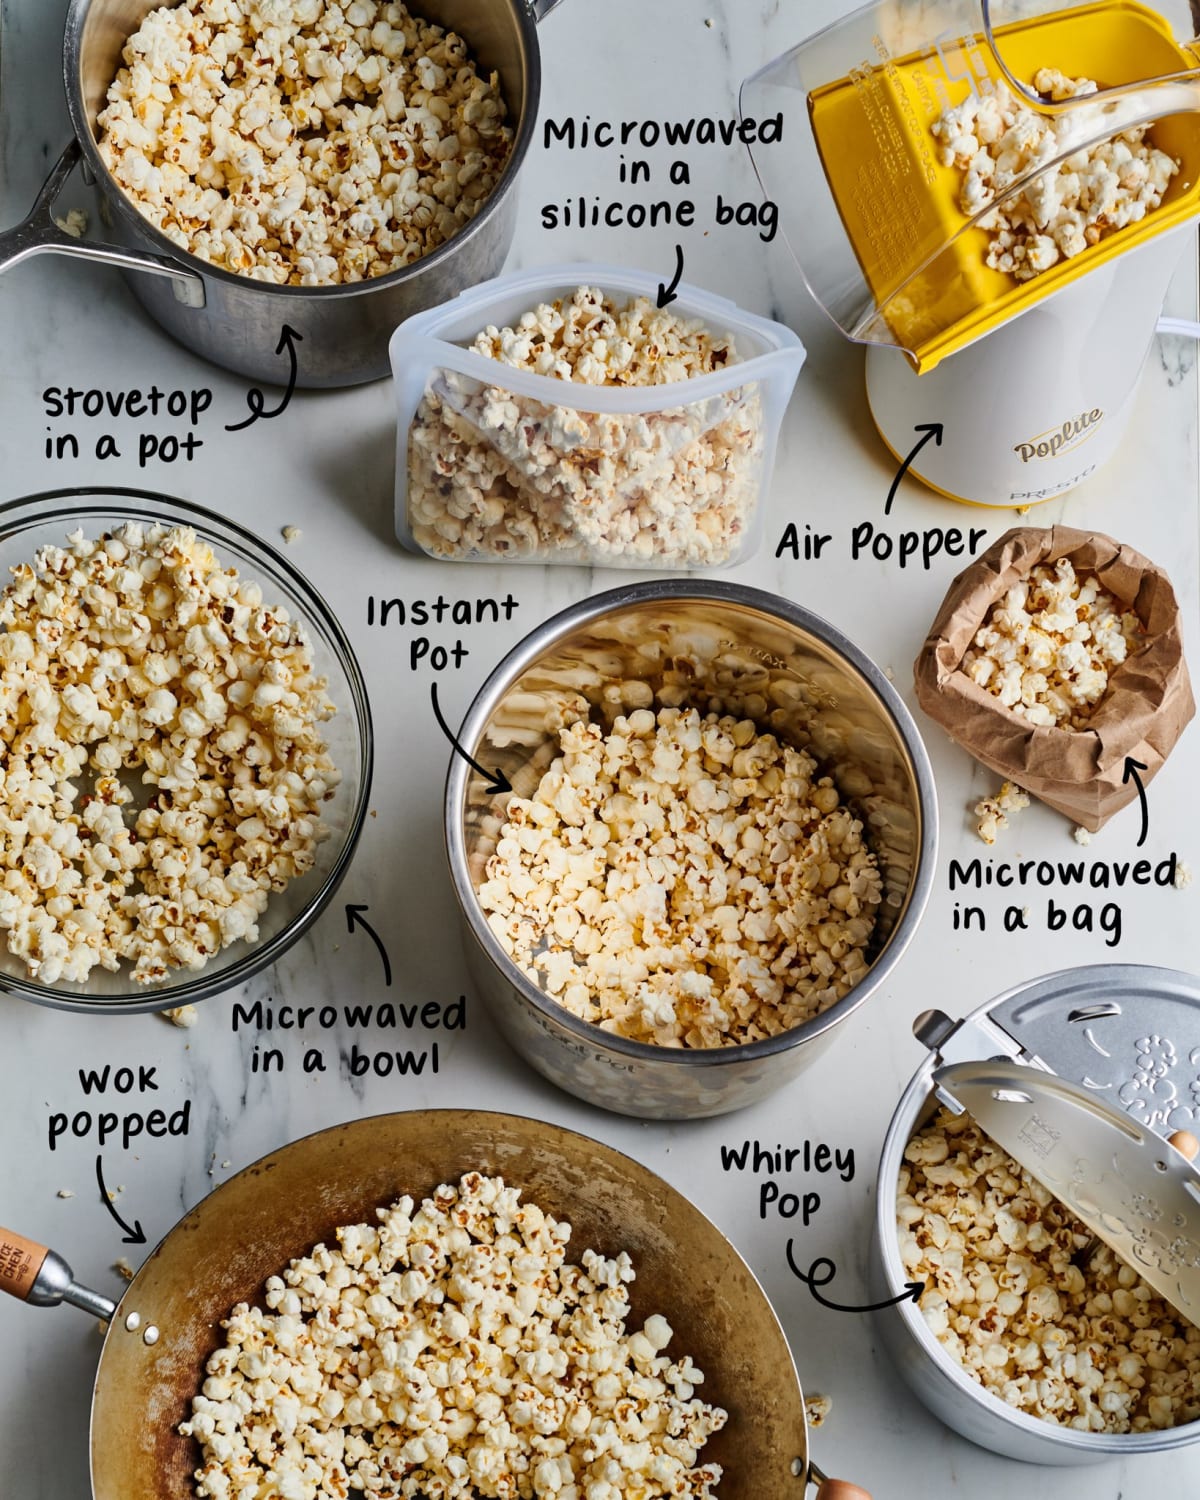 We tried 8 methods for popping popcorn and the winner resulted in a fun throwback (and had the fewest unpopped kernels):